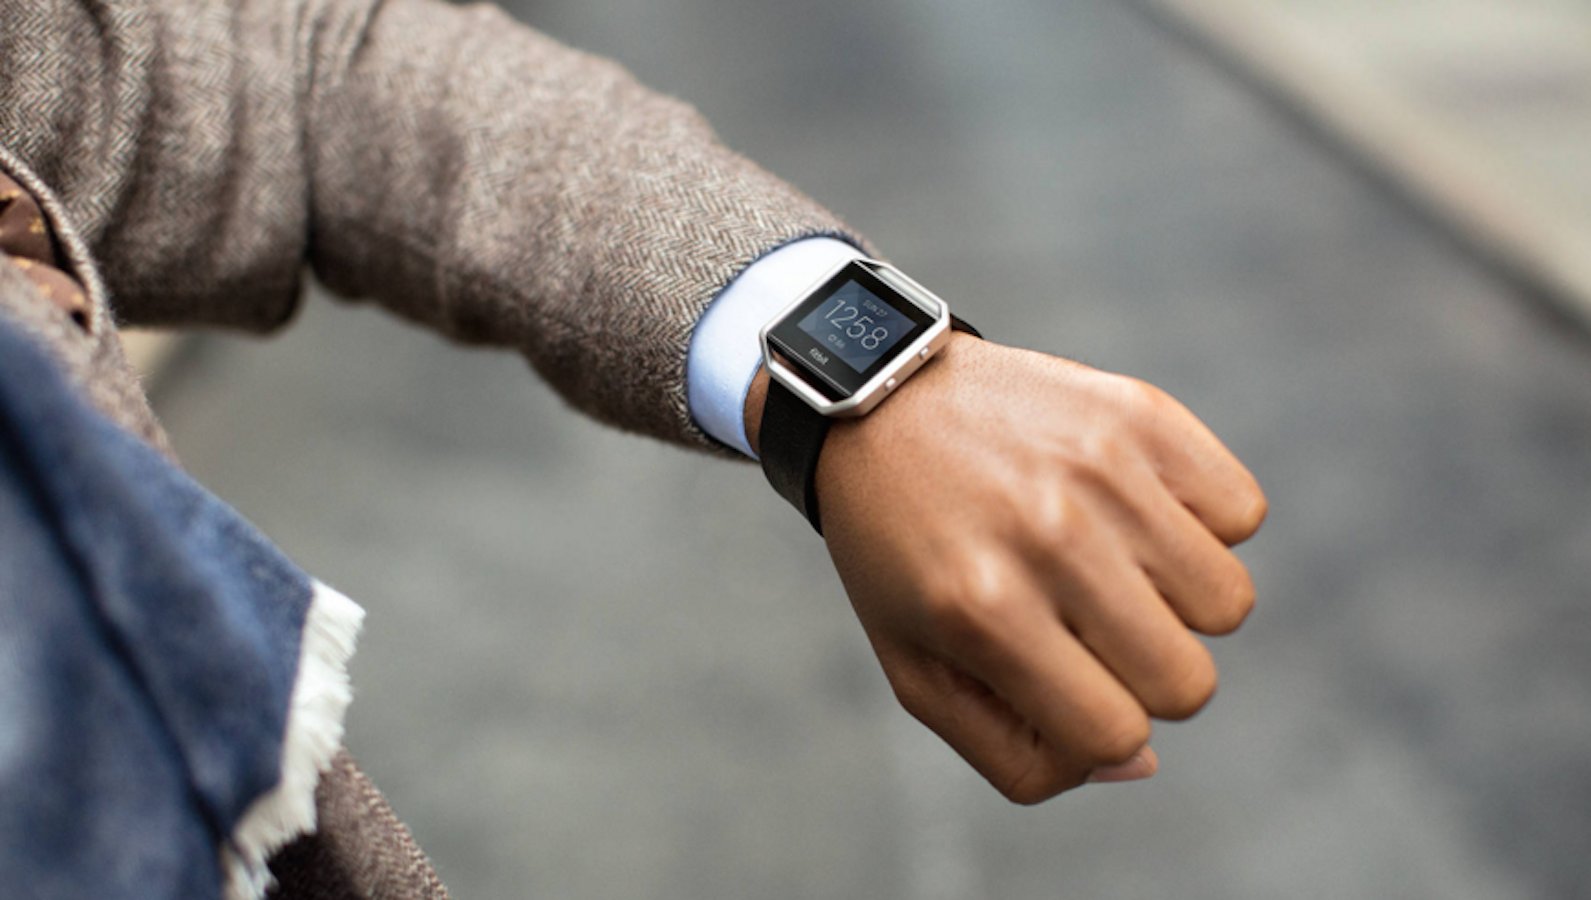 How Wearable Technology Can Improve Our Health And Daily Activities